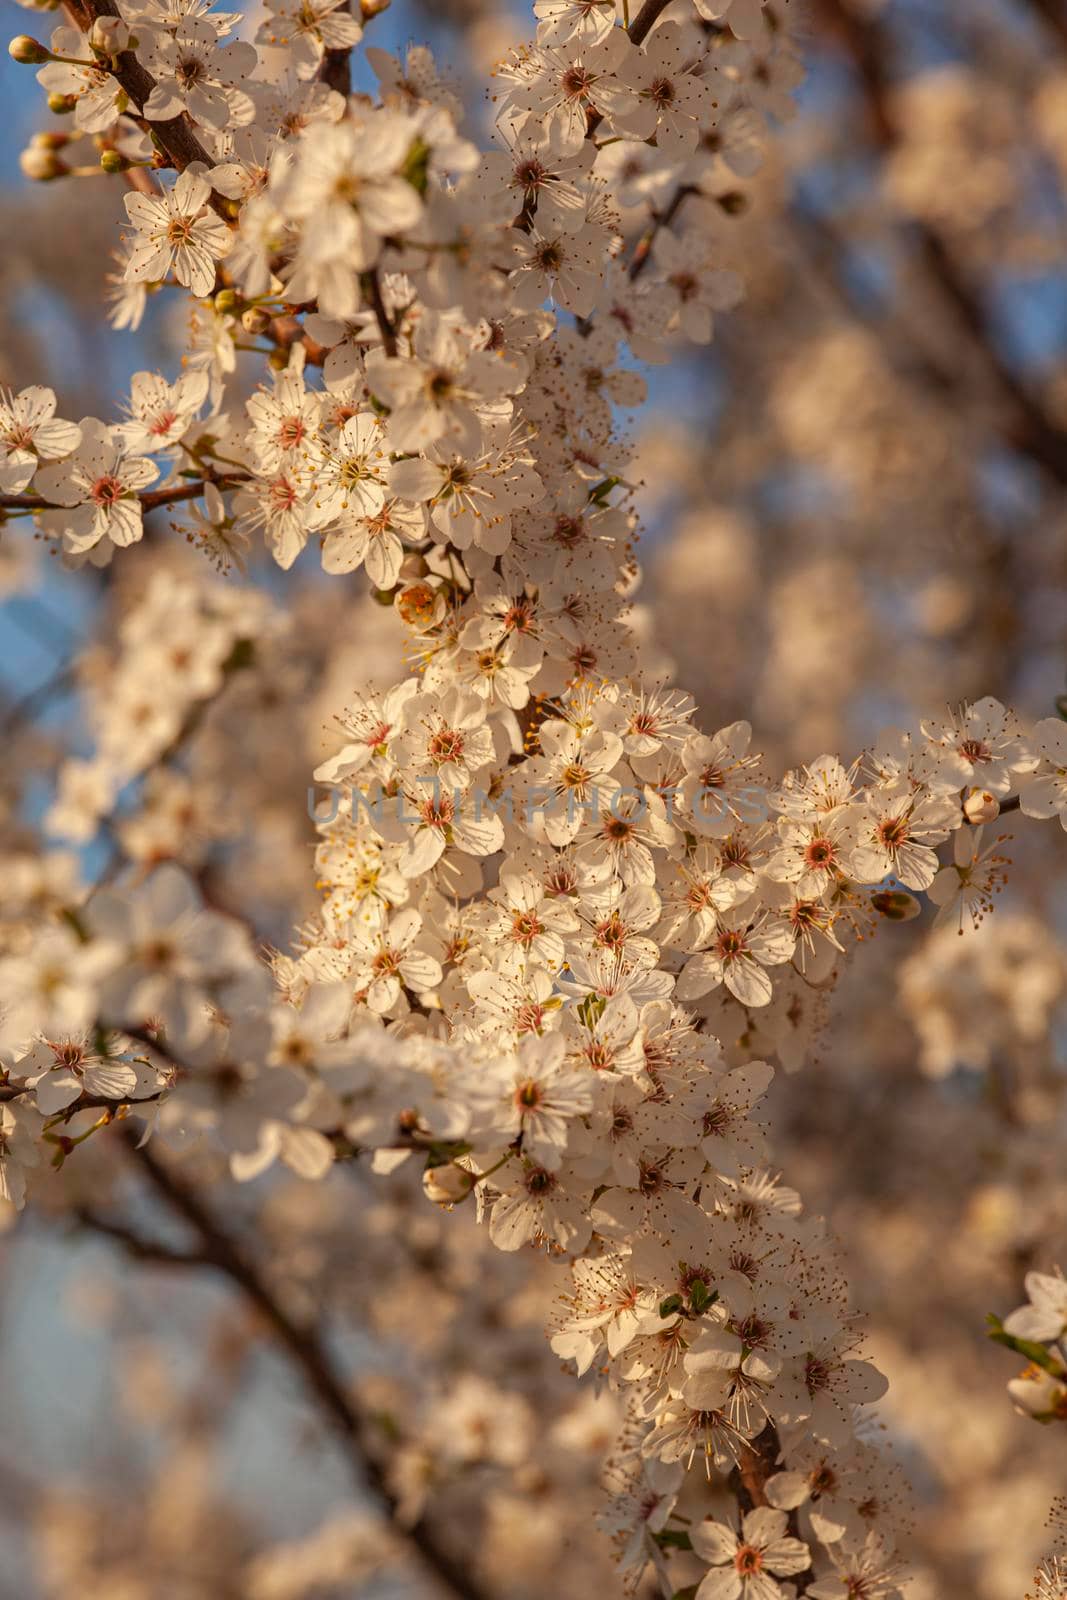 Plum tree flowers detail at sunset by pippocarlot